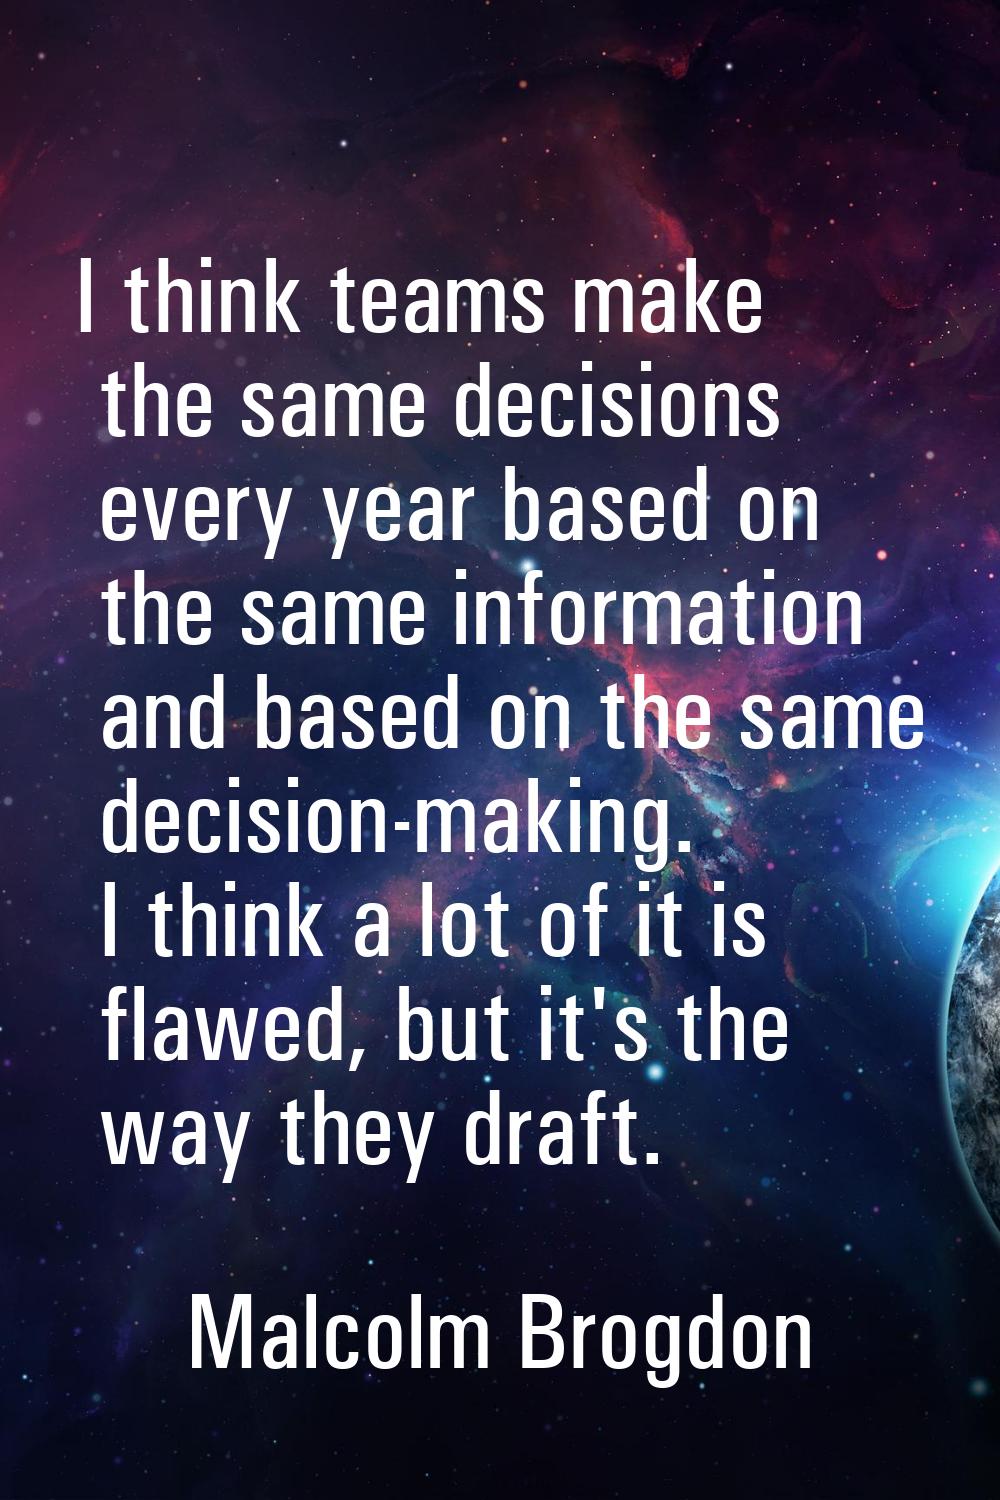 I think teams make the same decisions every year based on the same information and based on the sam